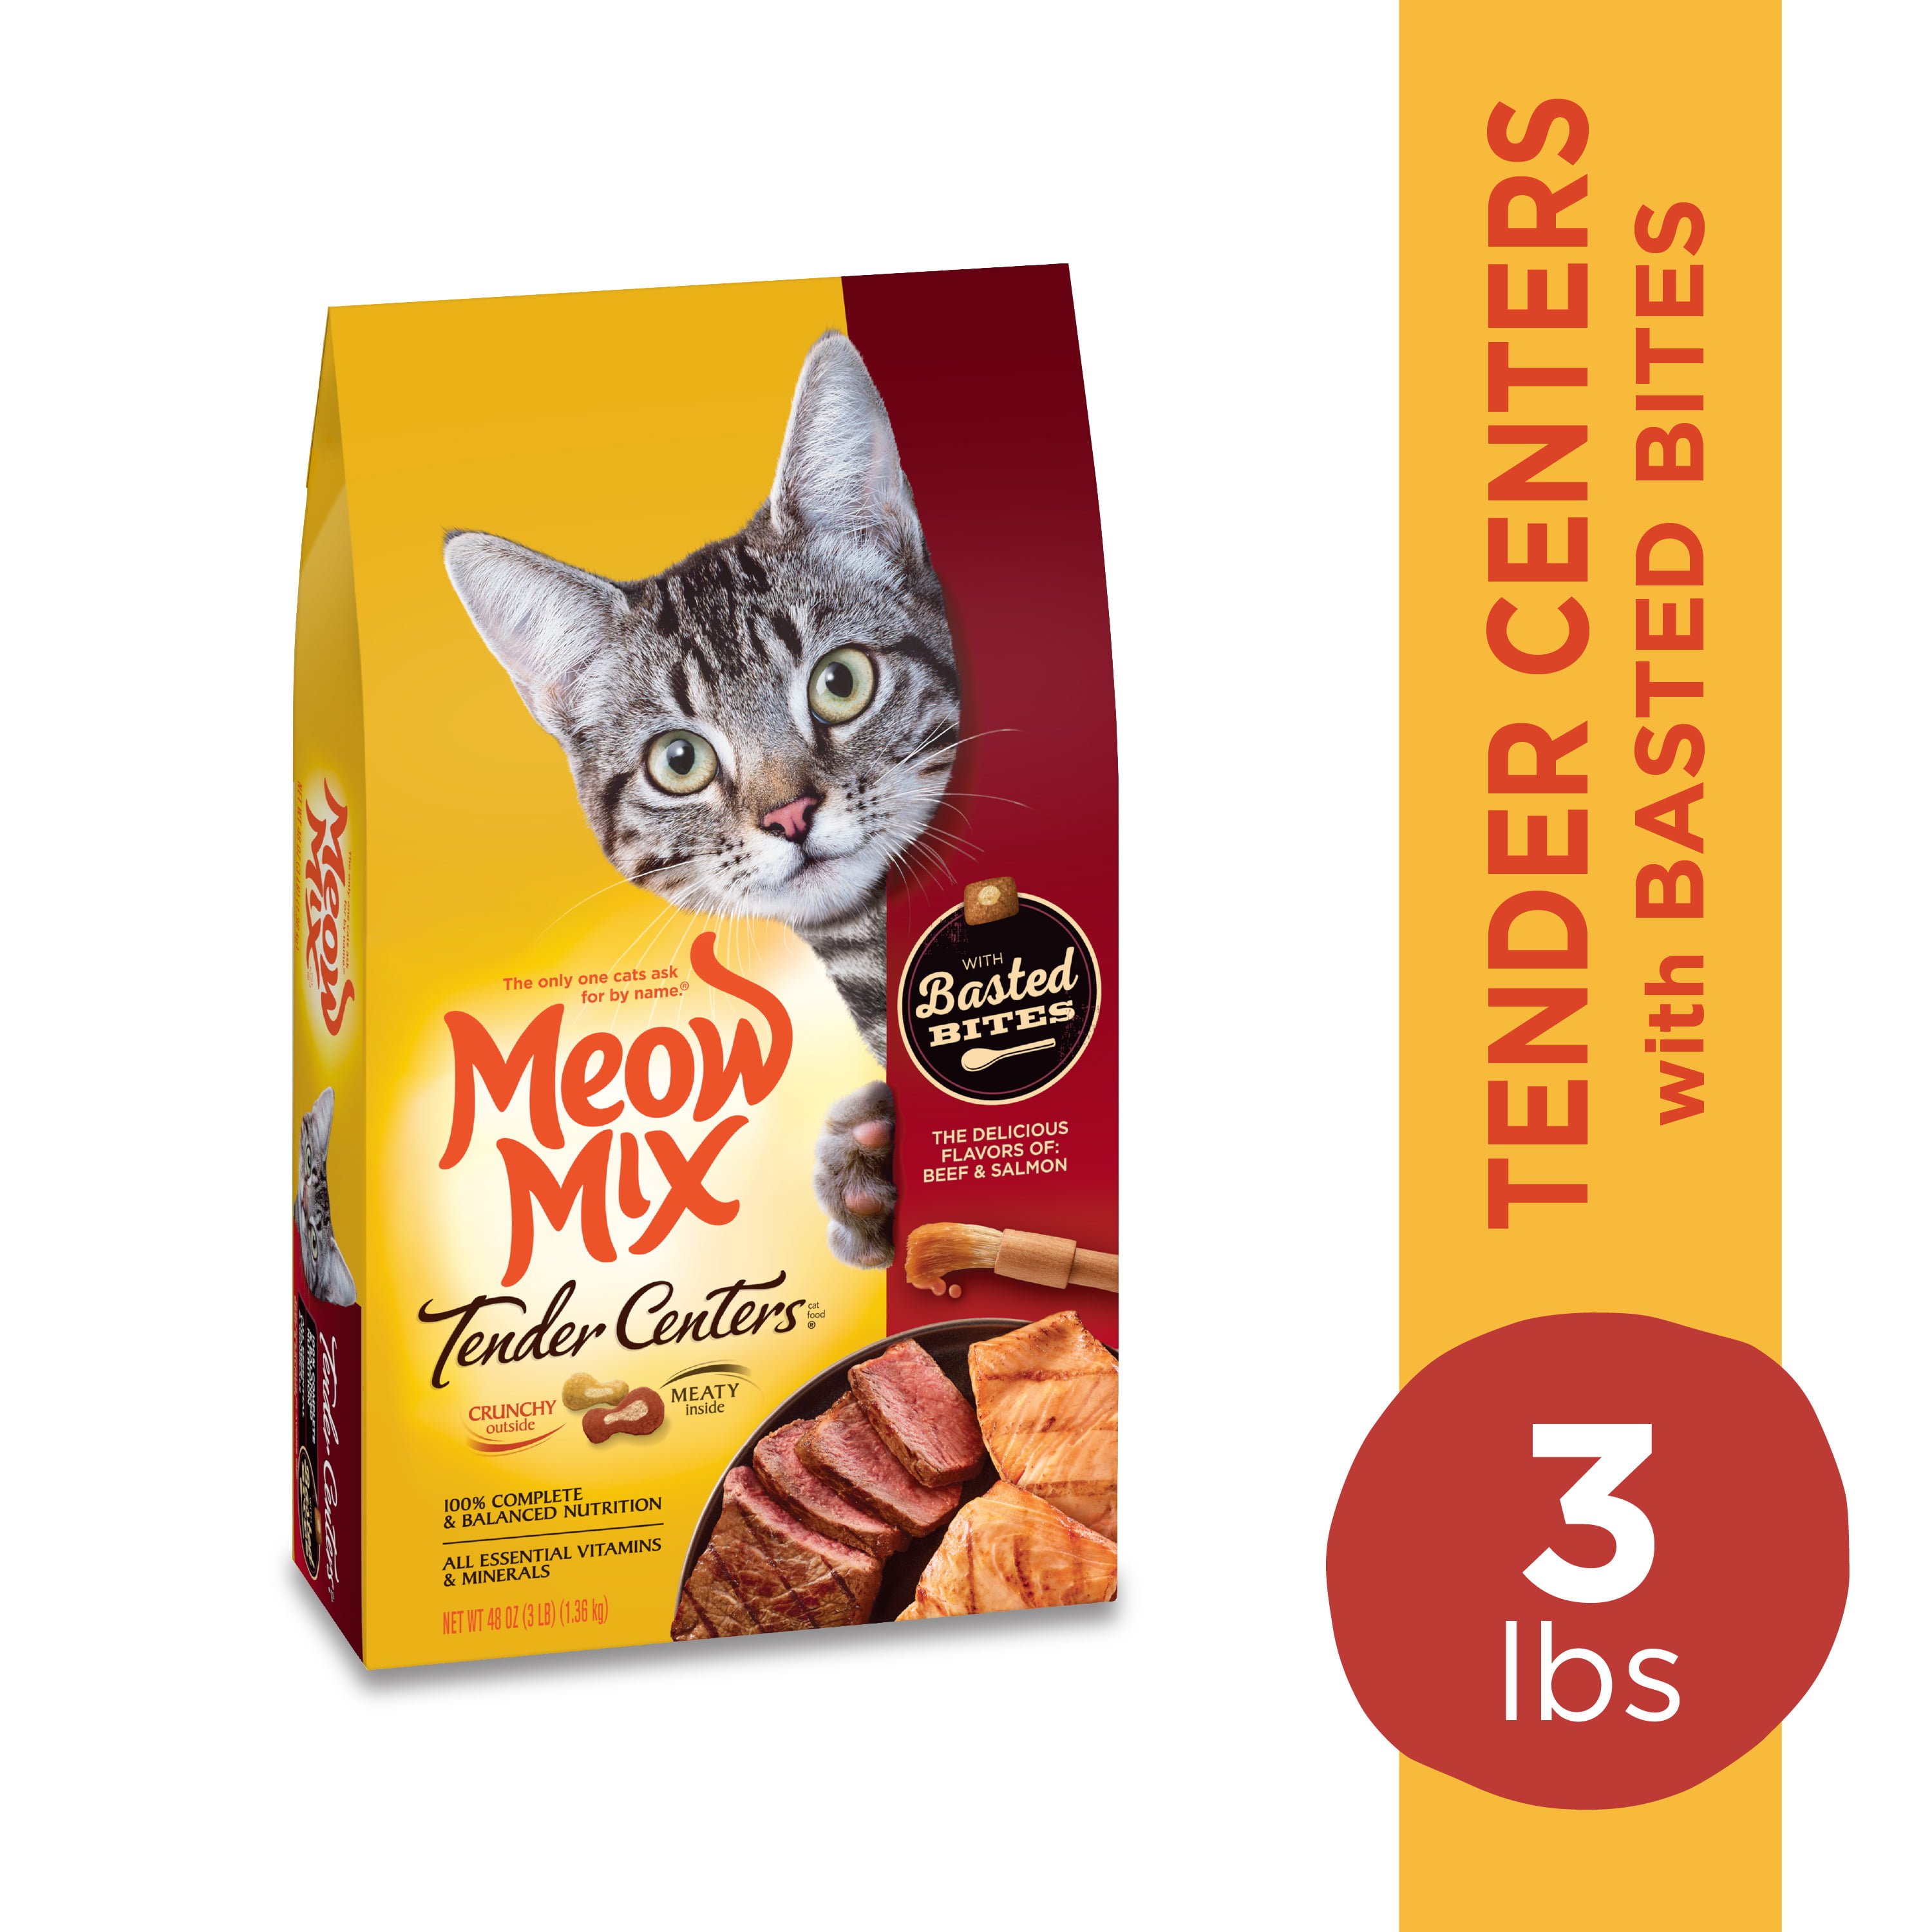 Meow Mix Tender Centers Dry Cat Food with Basted Bites, Beef & Salmon